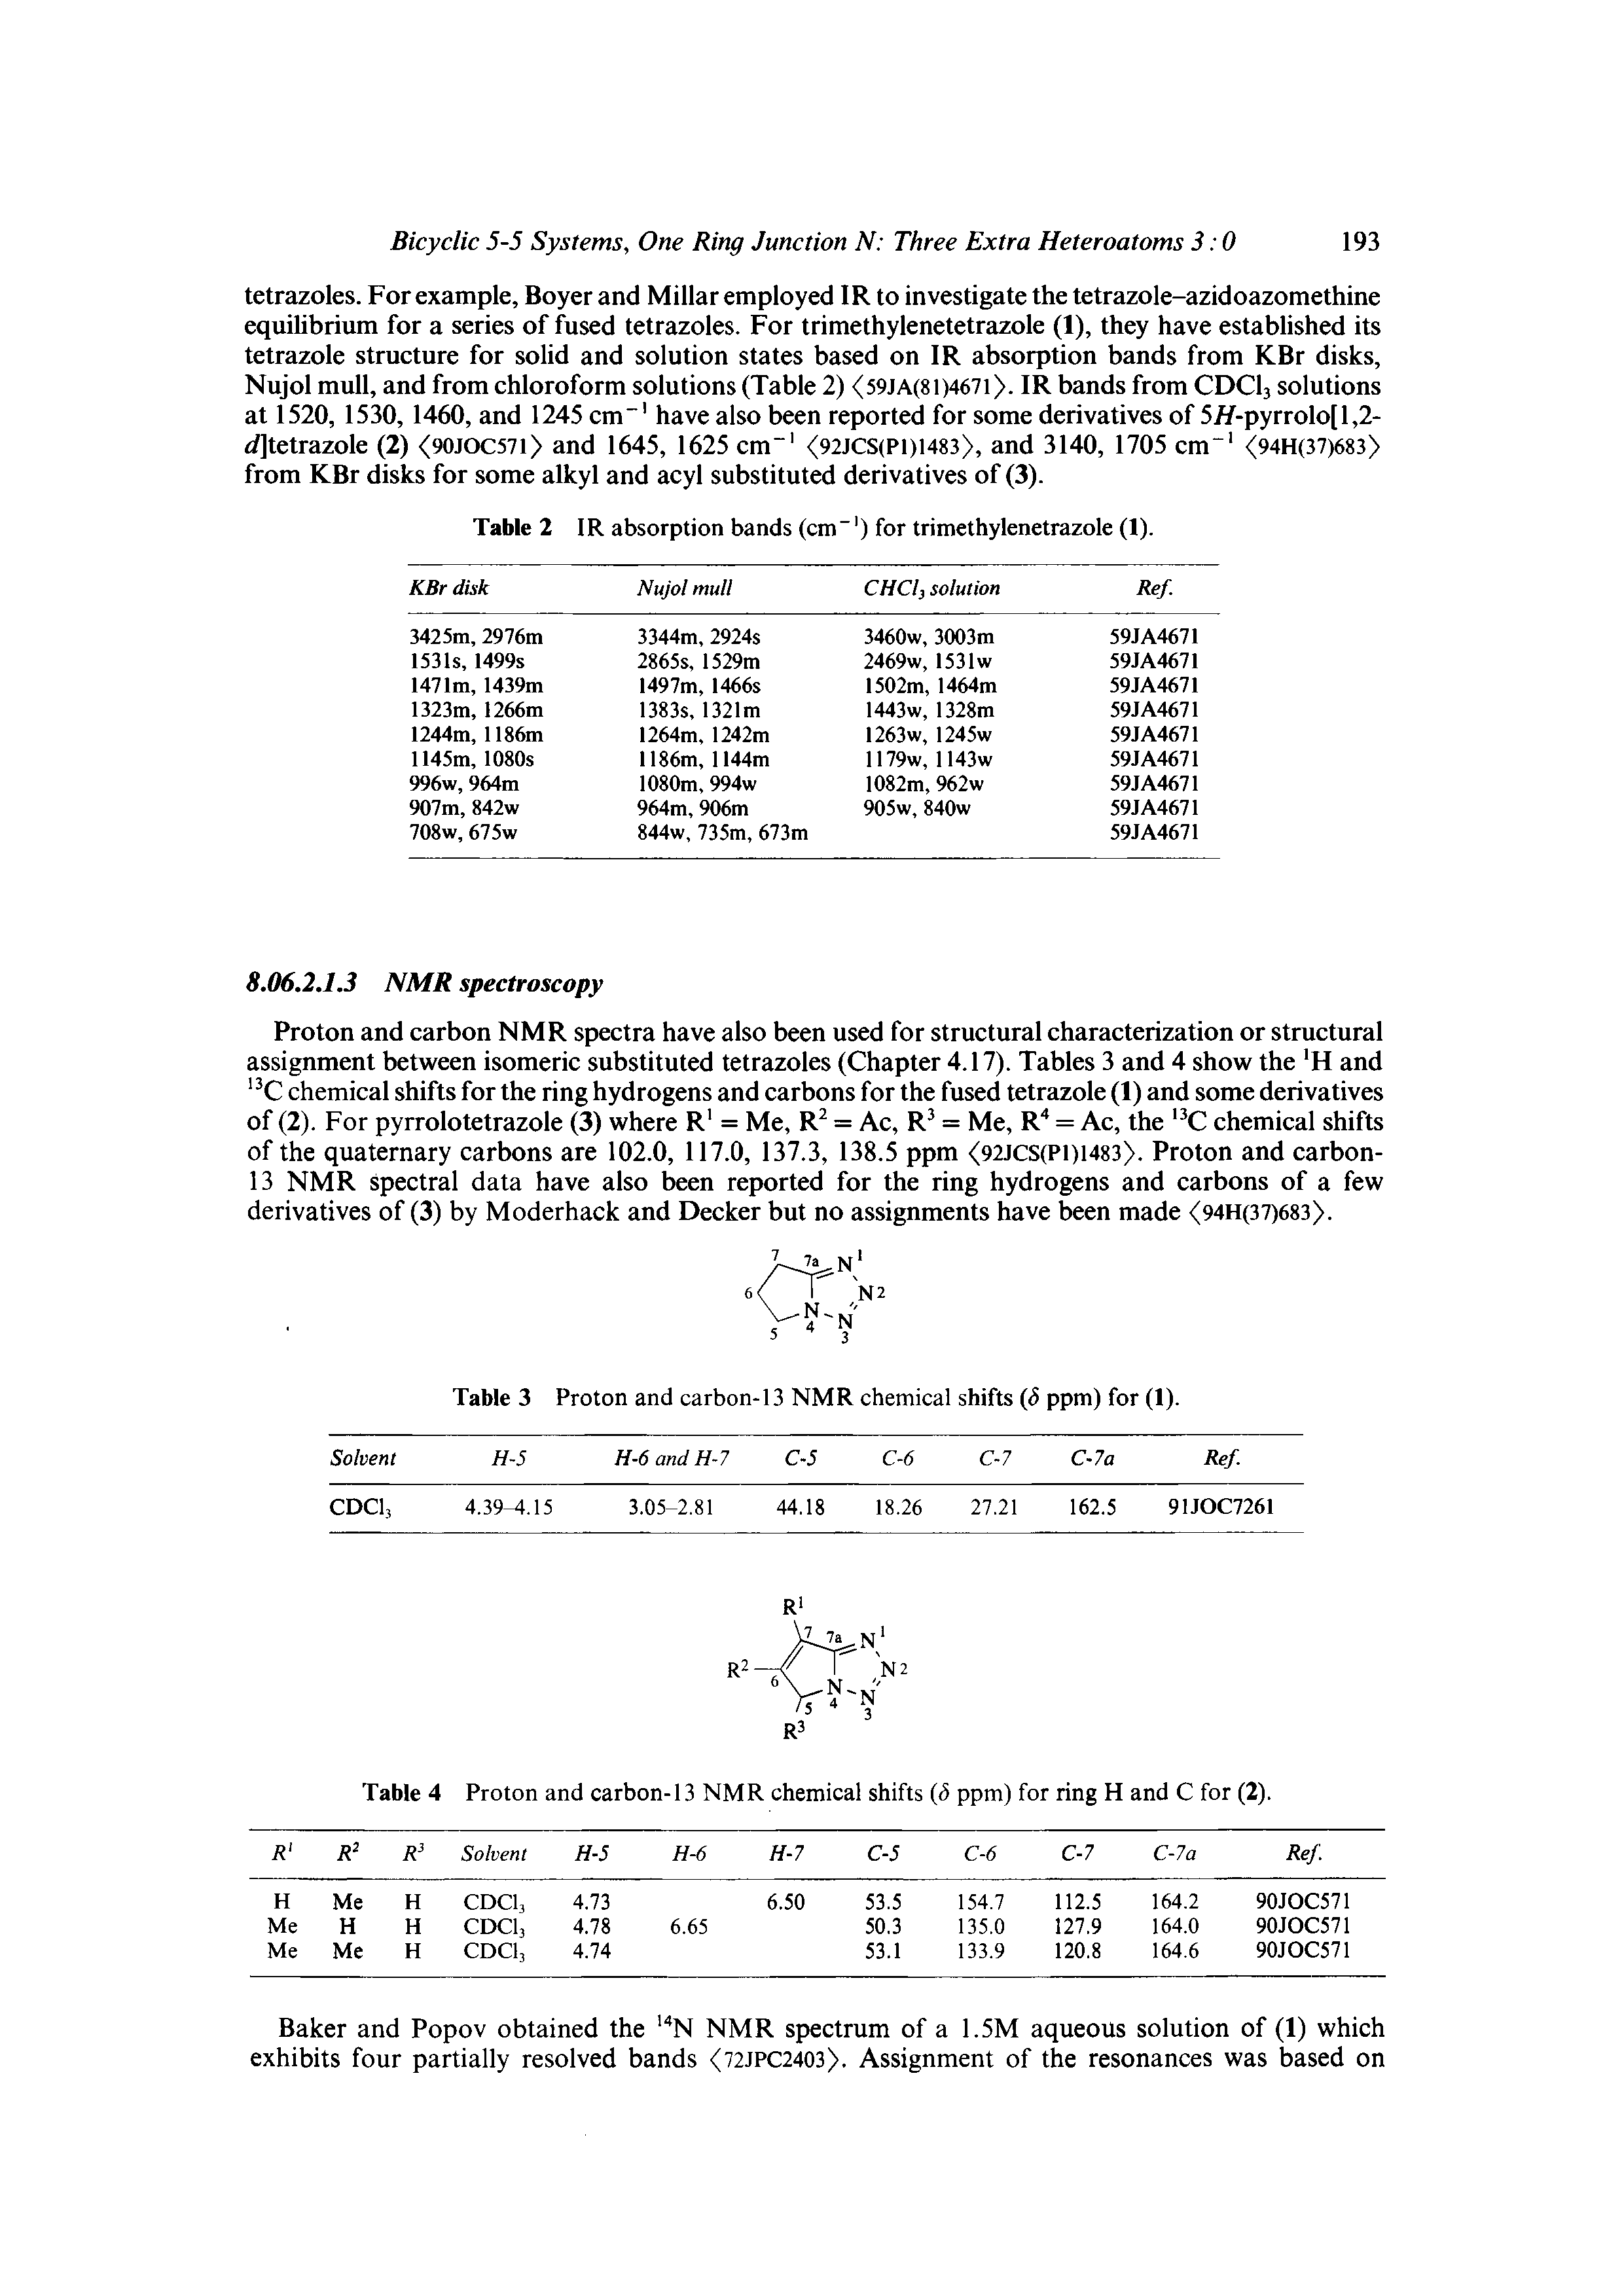 Table 4 Proton and carbon-13 NMR chemical shifts (5 ppm) for ring H and C for (2).